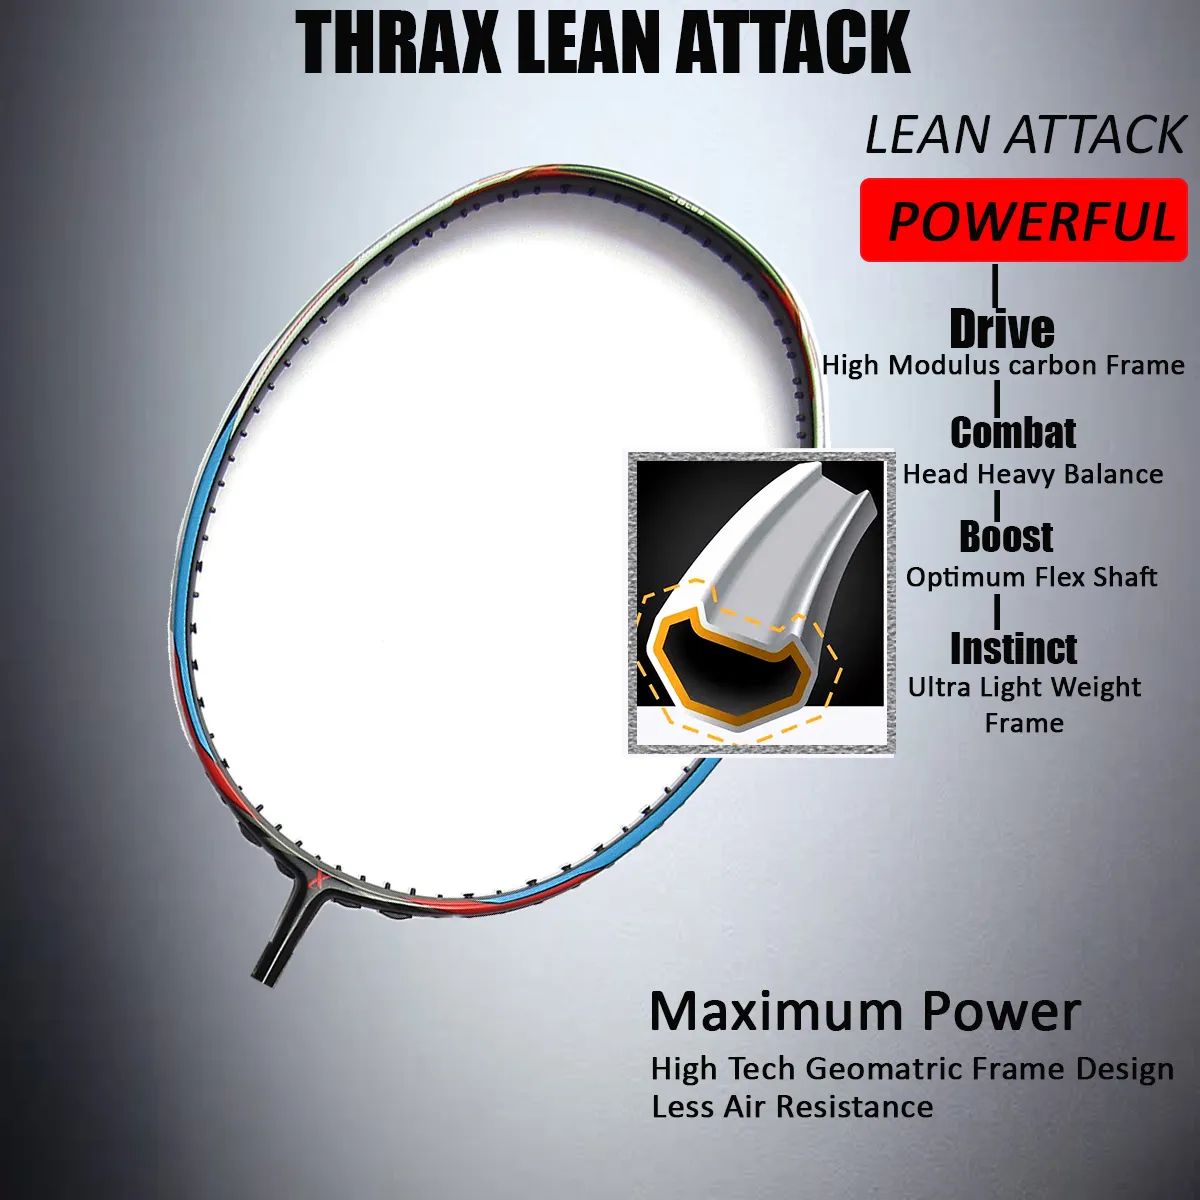 Thrax_G_Force_II_Gen_Racket_cROSSECHION_and_Lean_Attack_Technology8419